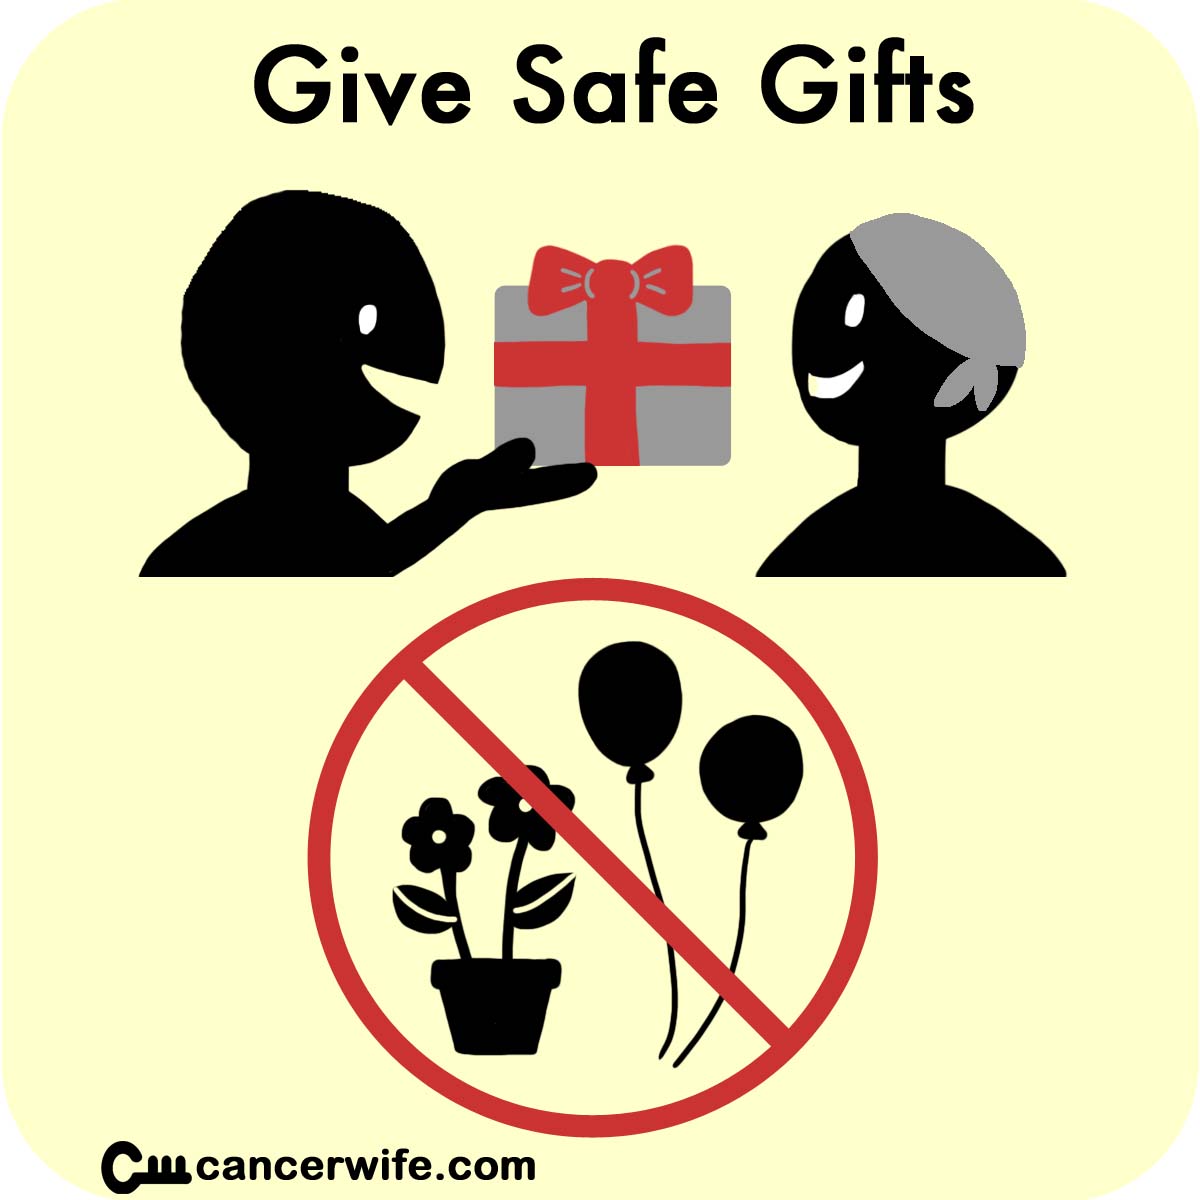 Tips for visiting cancer patients, give safe gifts, no fresh flowers or balloons